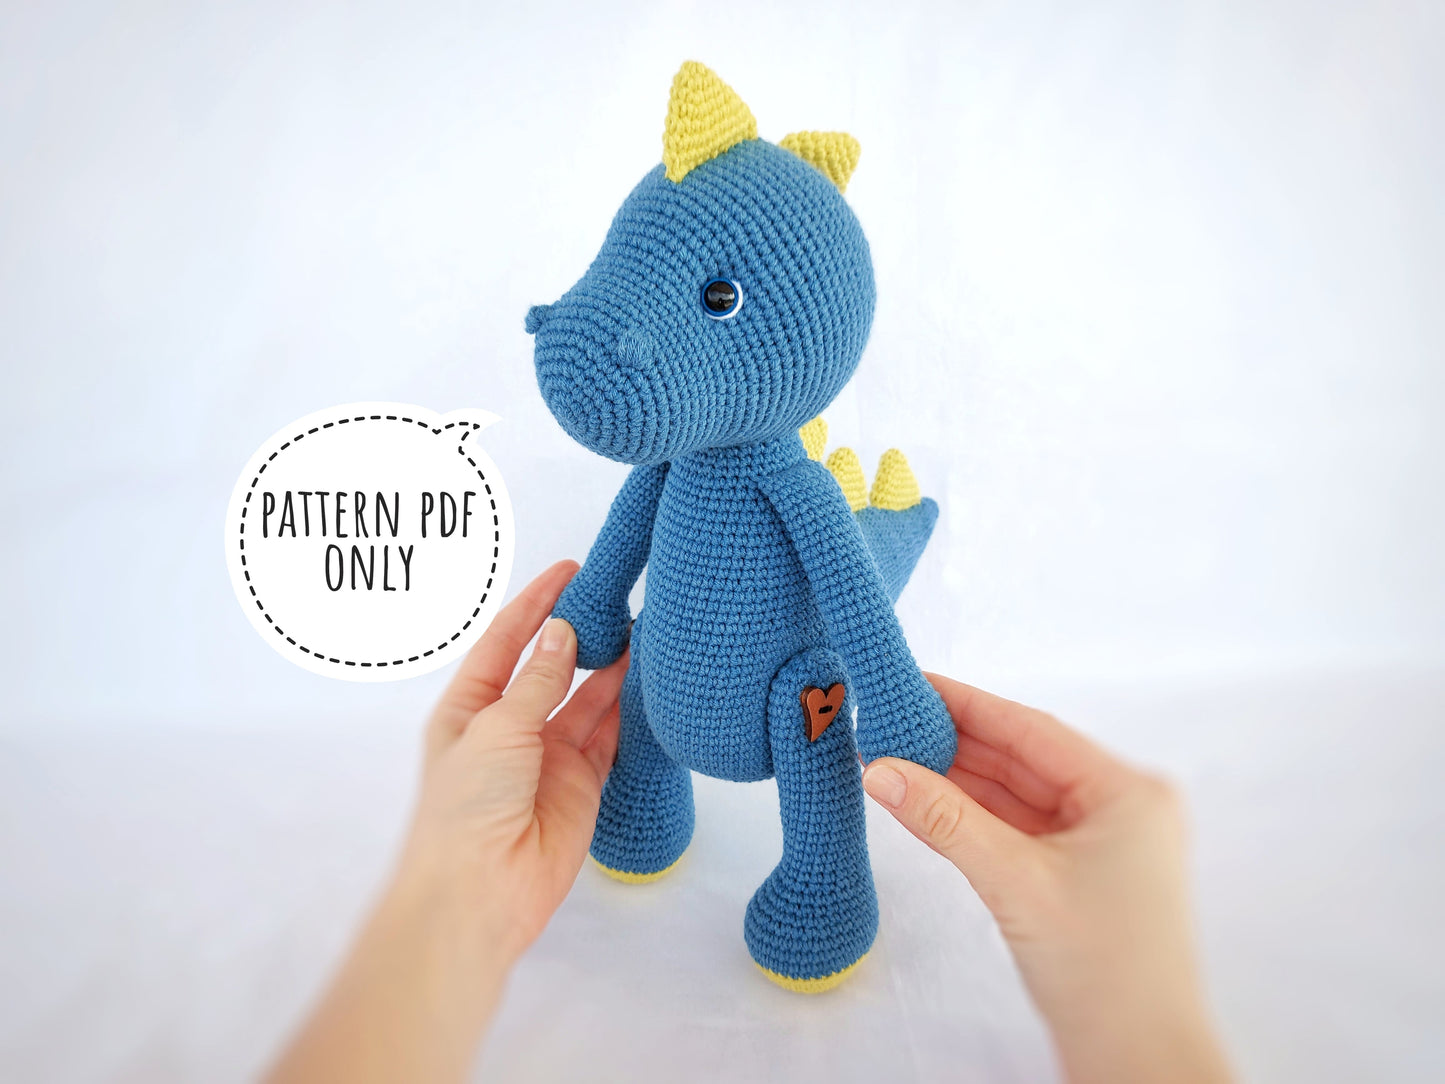 Crochet dinosaur pattern in English, Babies Collection - Amigurumi Toys pattern, Instant PDF Download